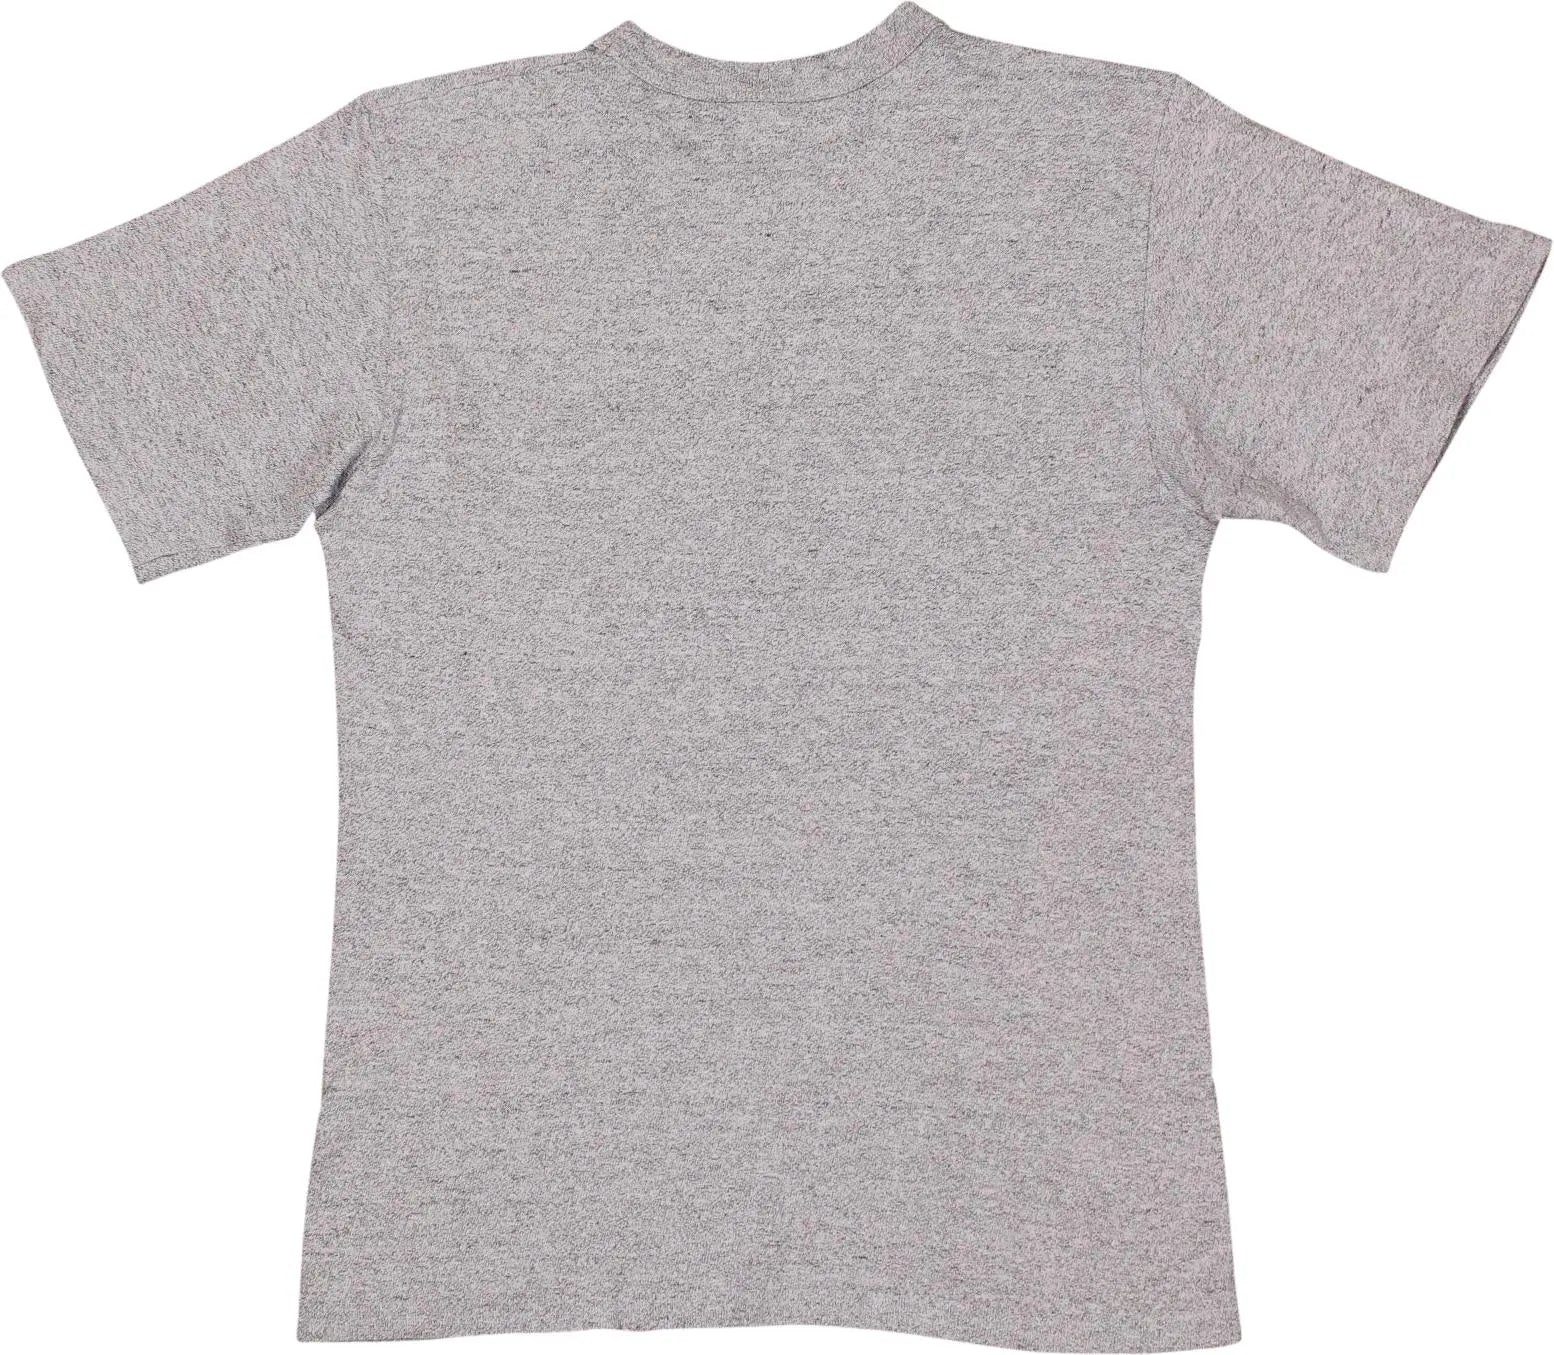 Champion - Grey T-shirt by Champion- ThriftTale.com - Vintage and second handclothing